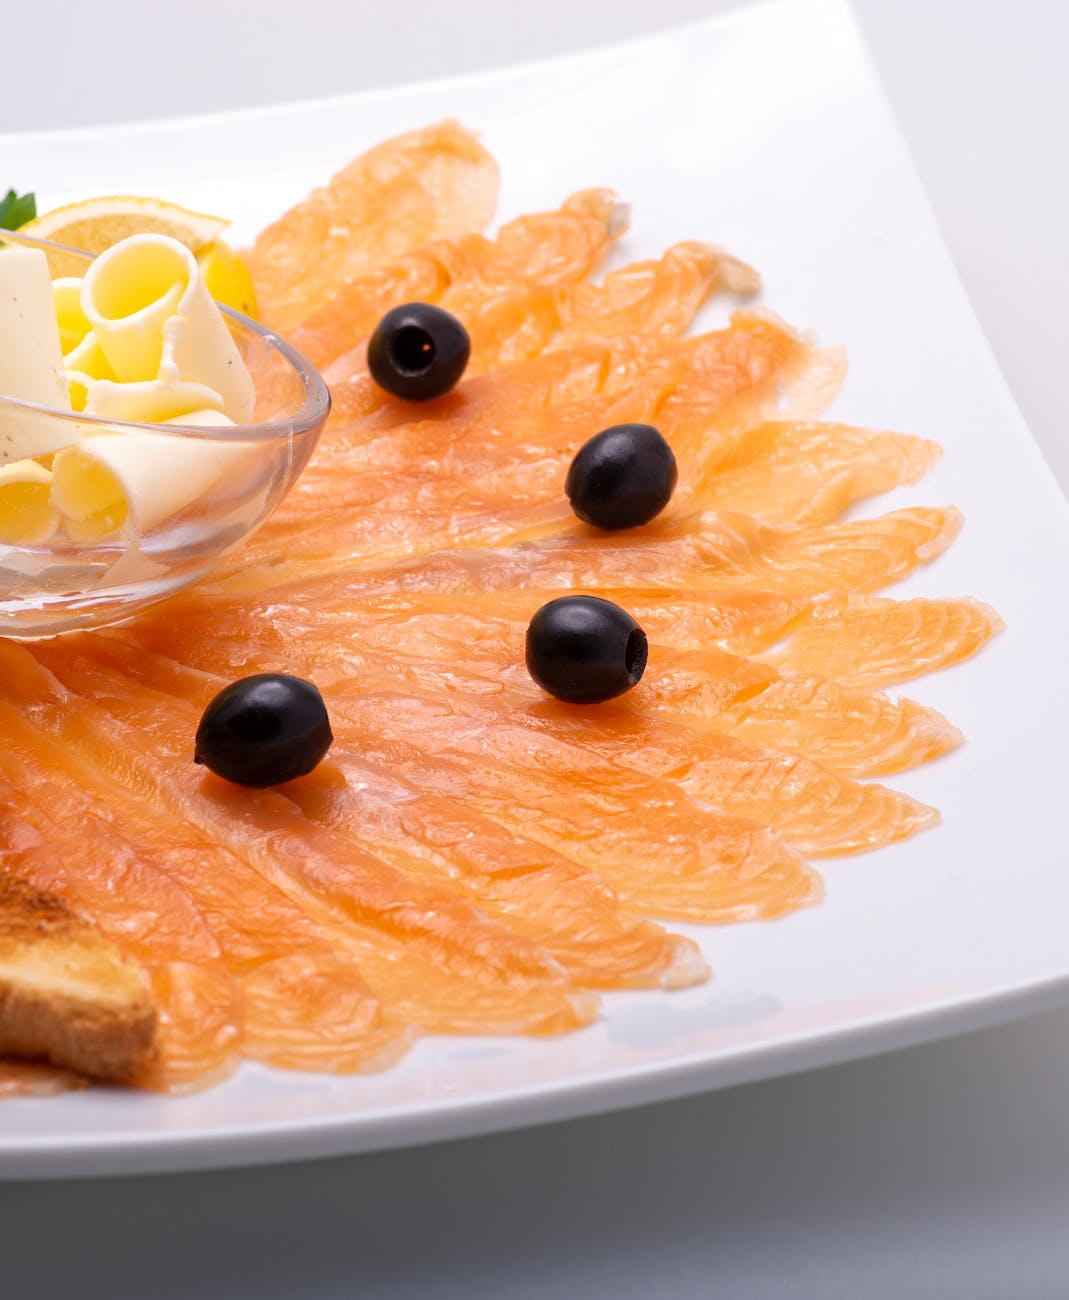 sliced smoked salmon on a plate